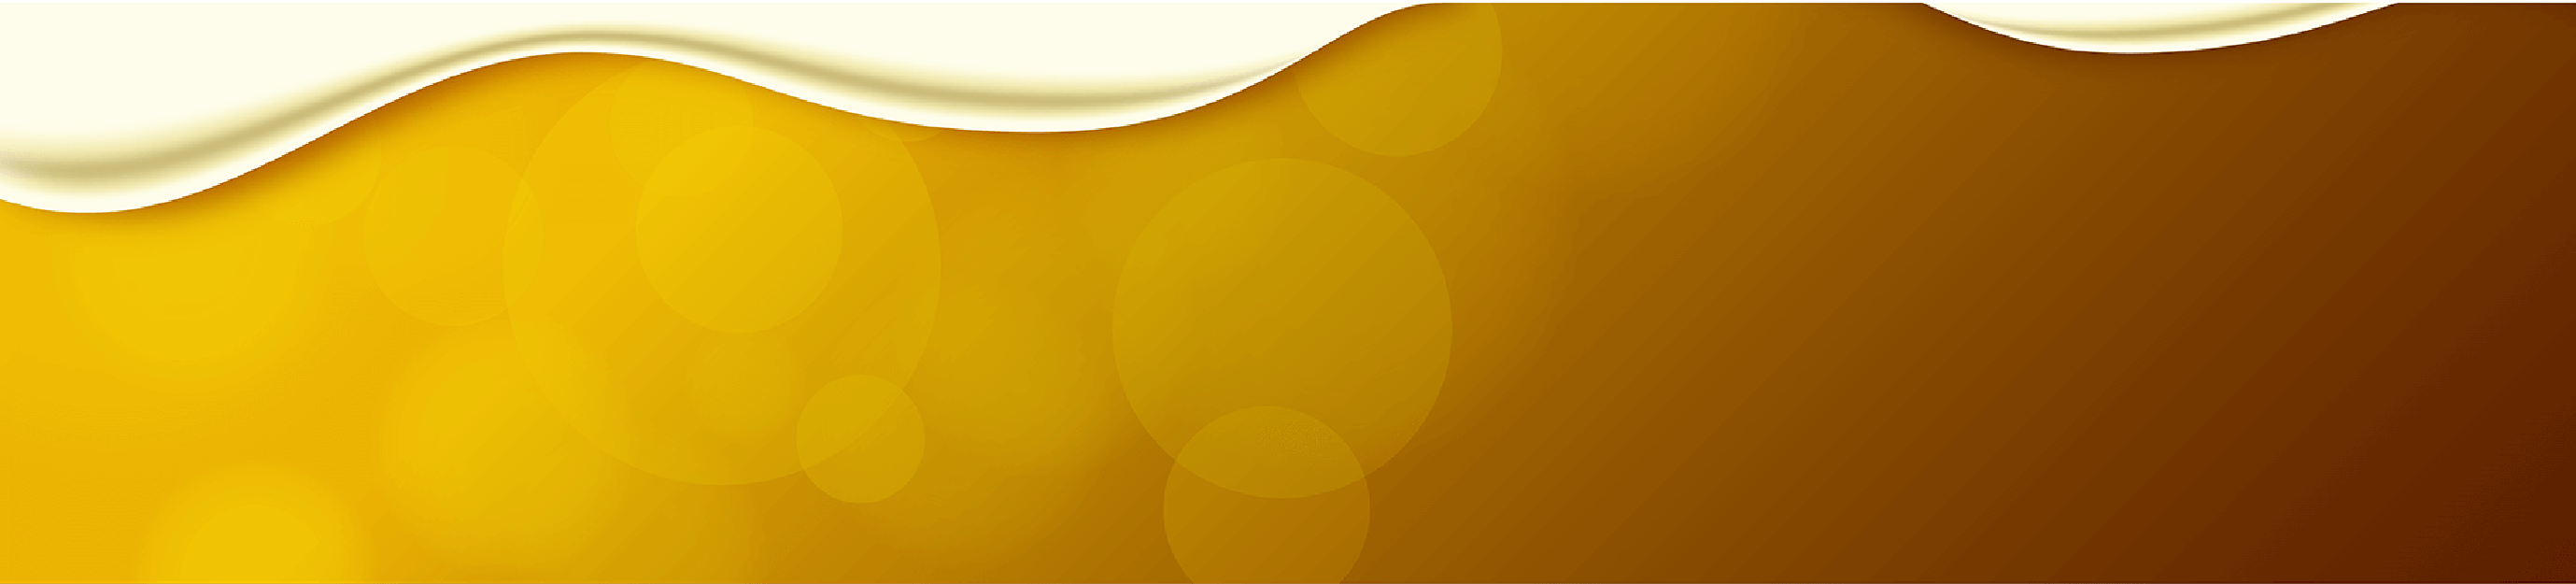 Background image of beer suds